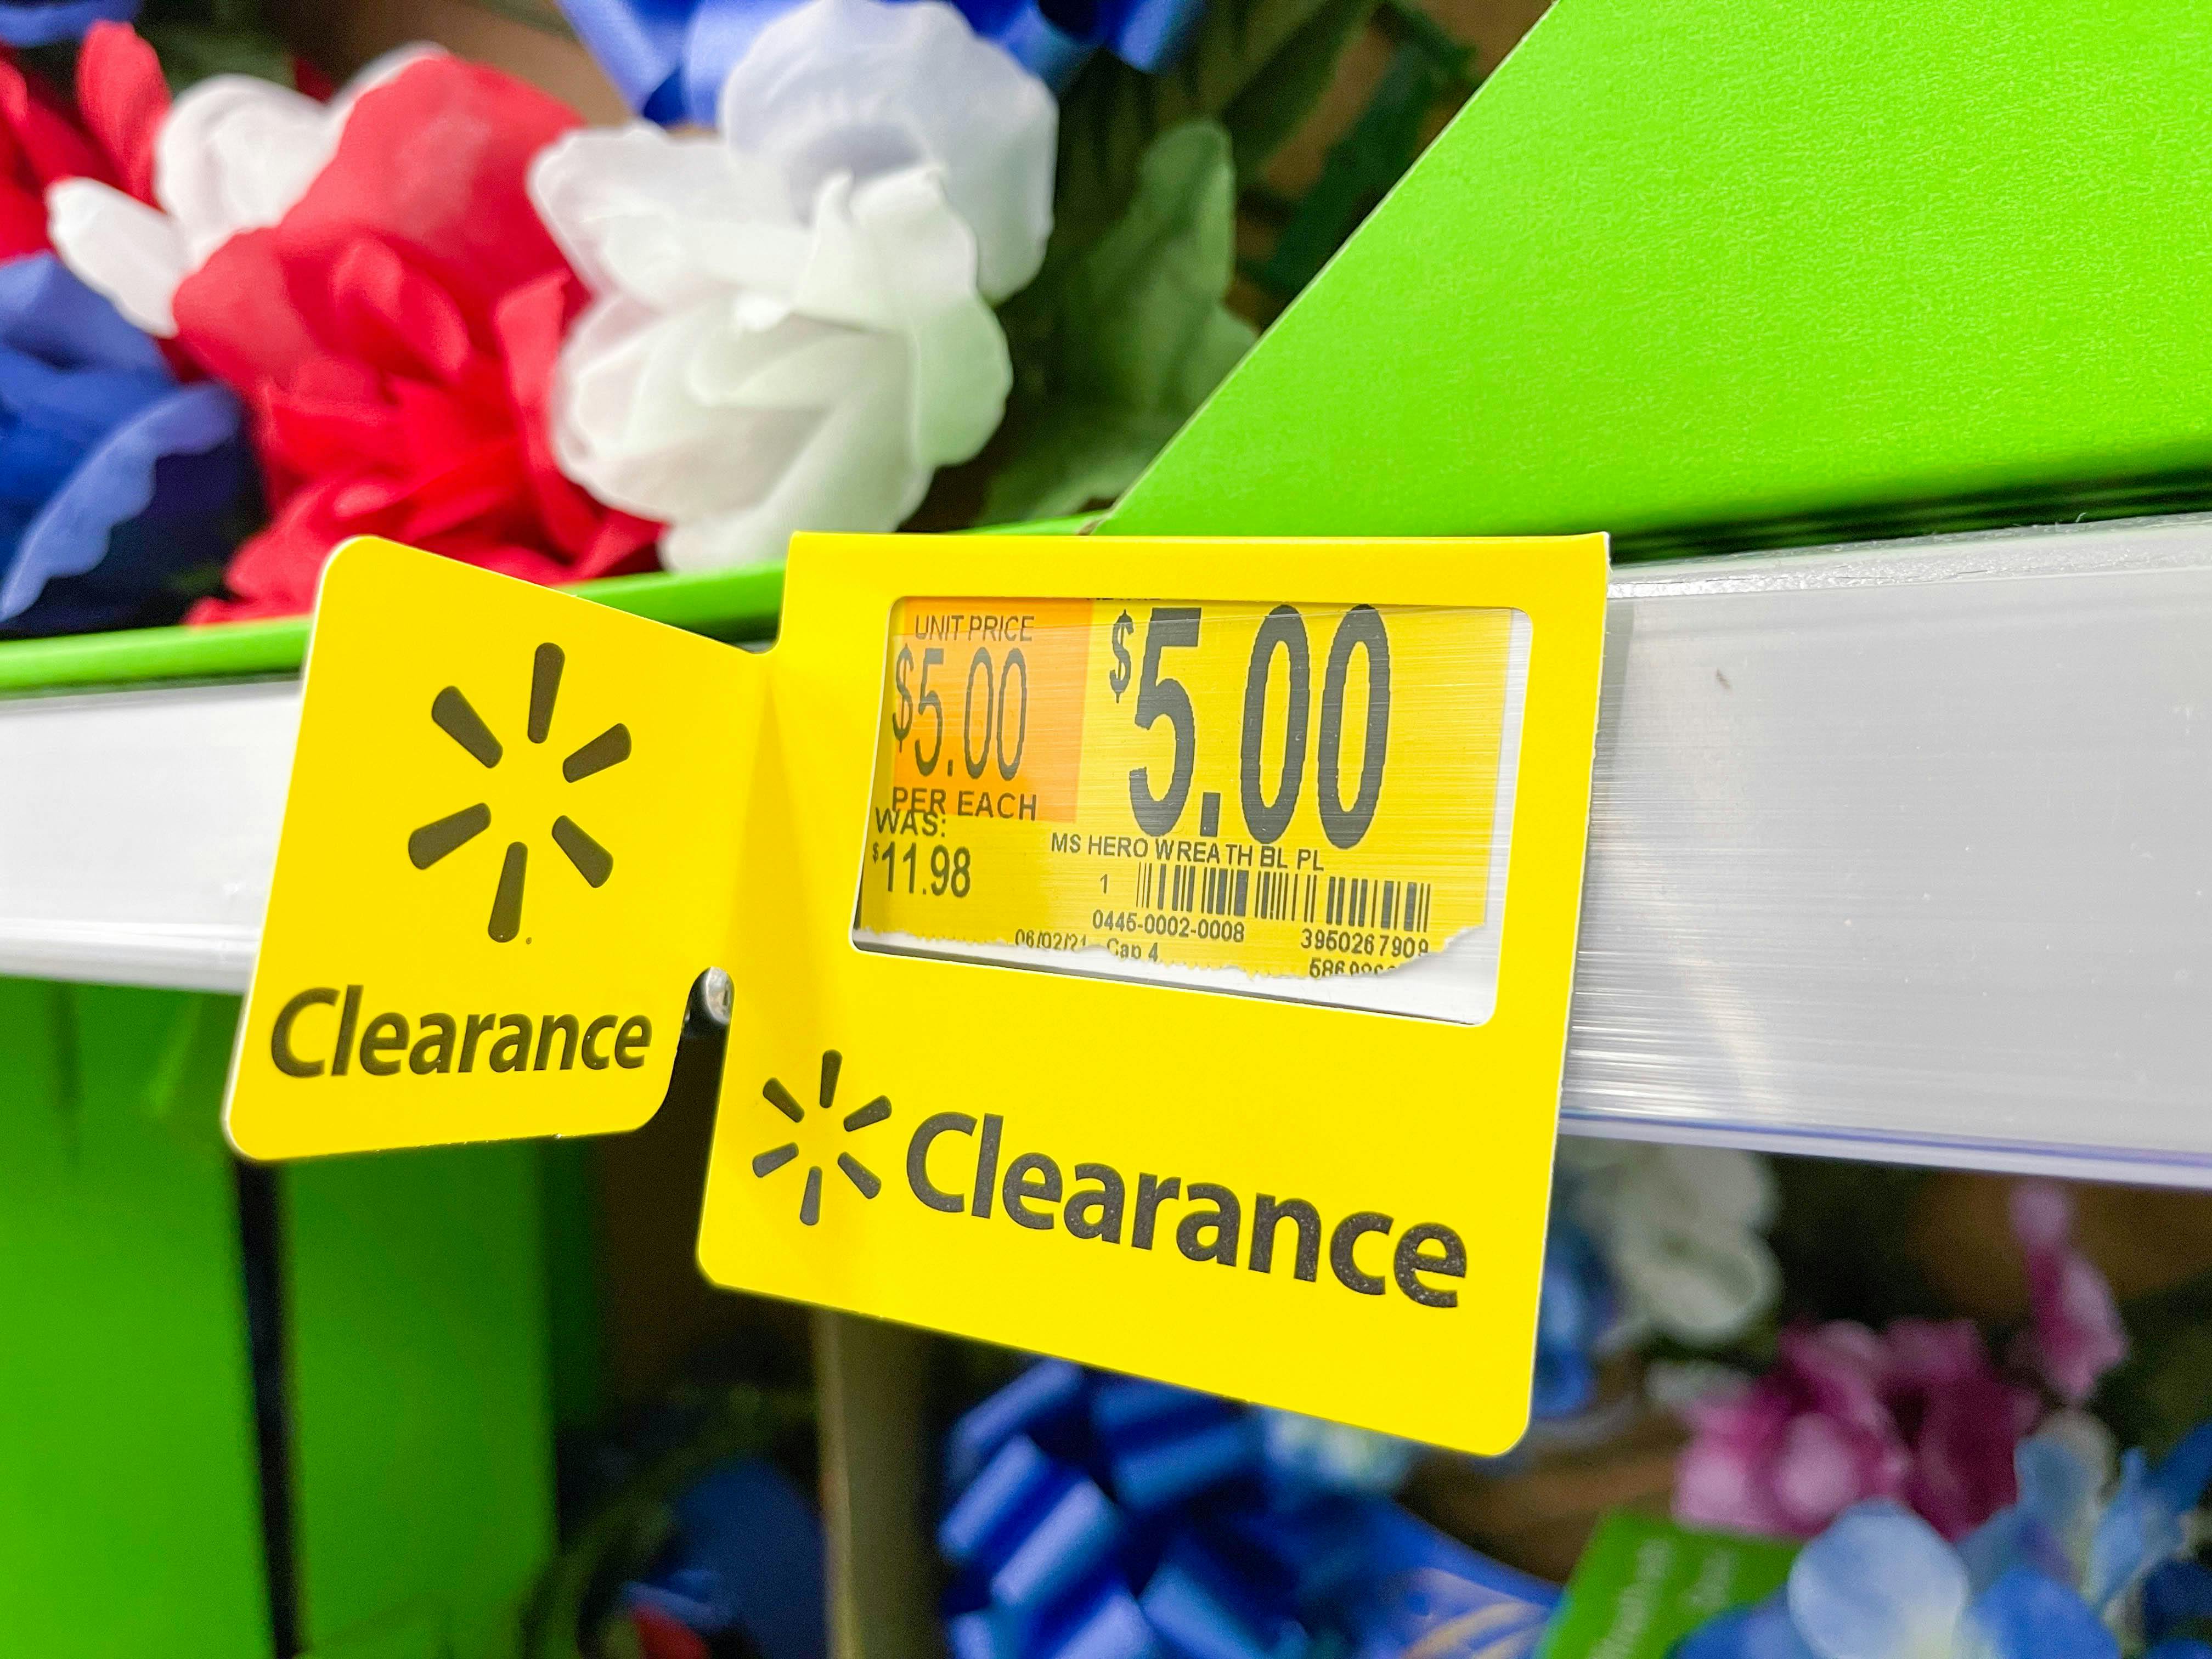 walmart $5 clearance tag on shelf with artificial floral arrangements